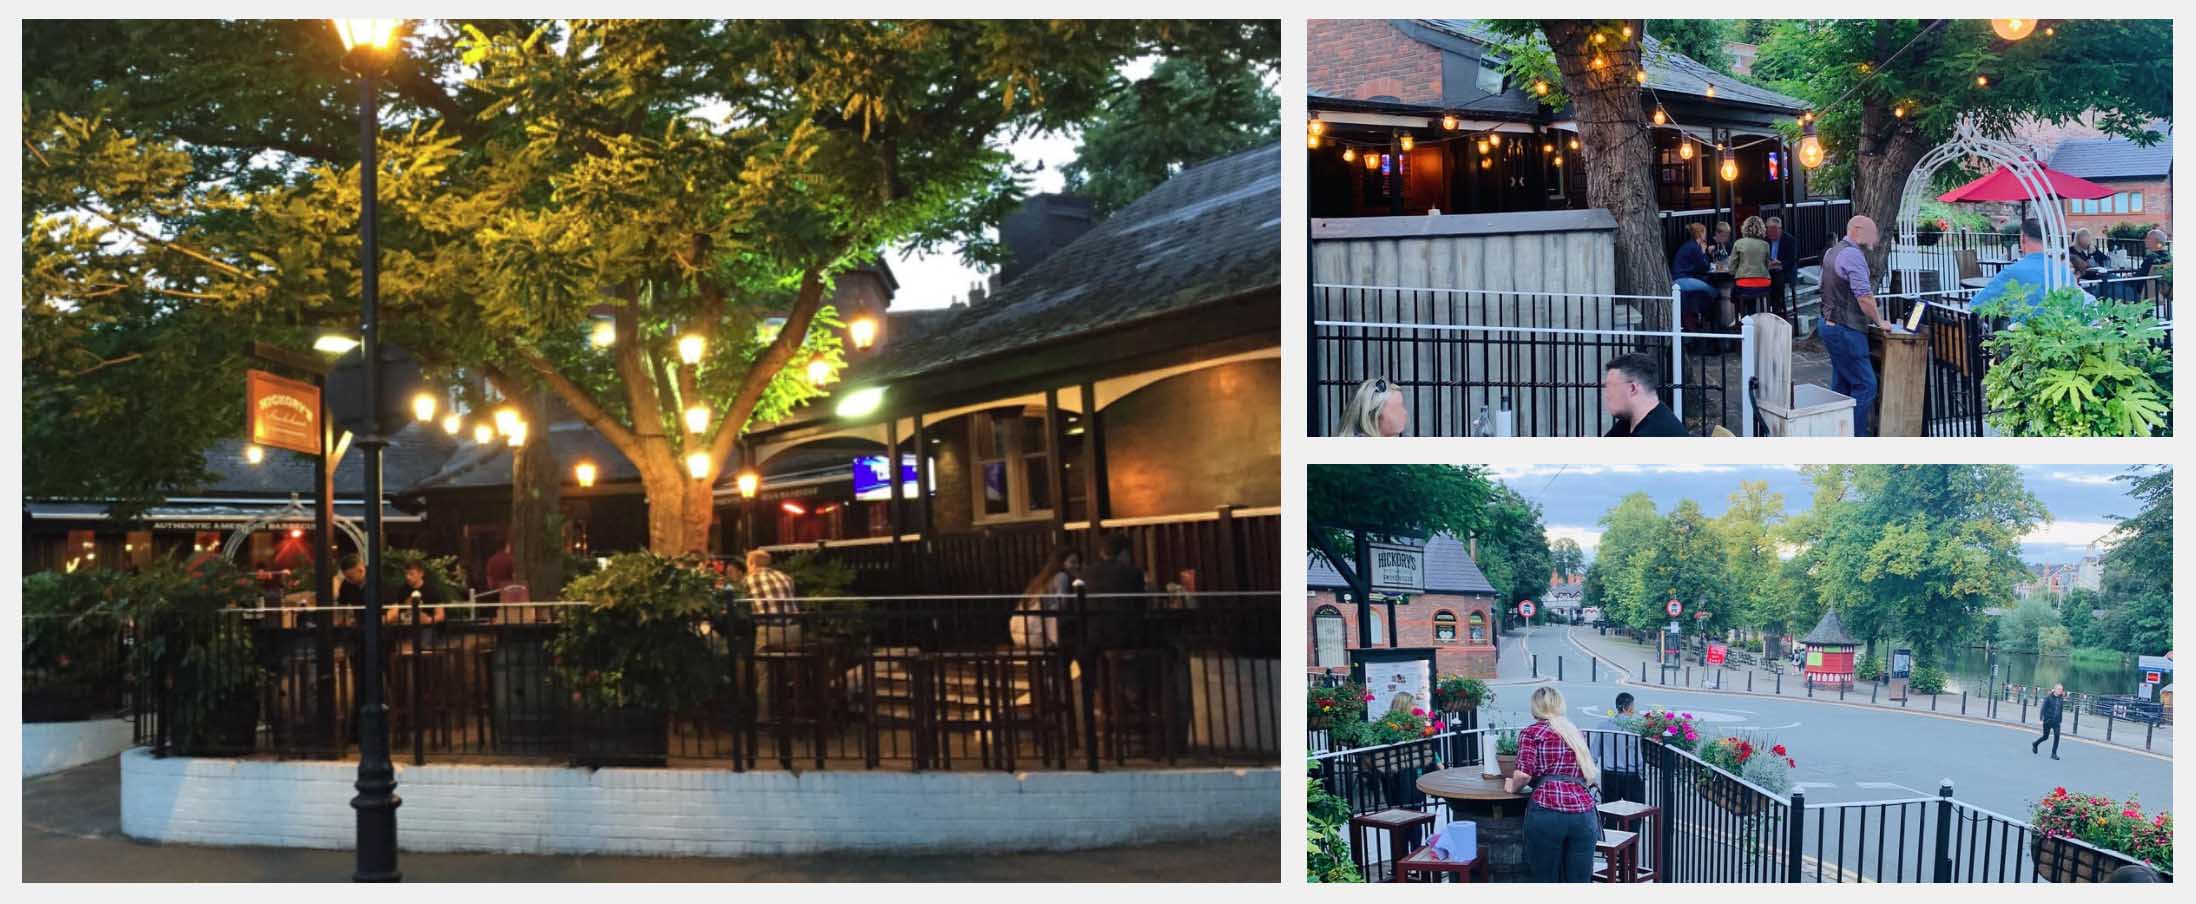 Best Beer Gardens in Chester - Hickory's